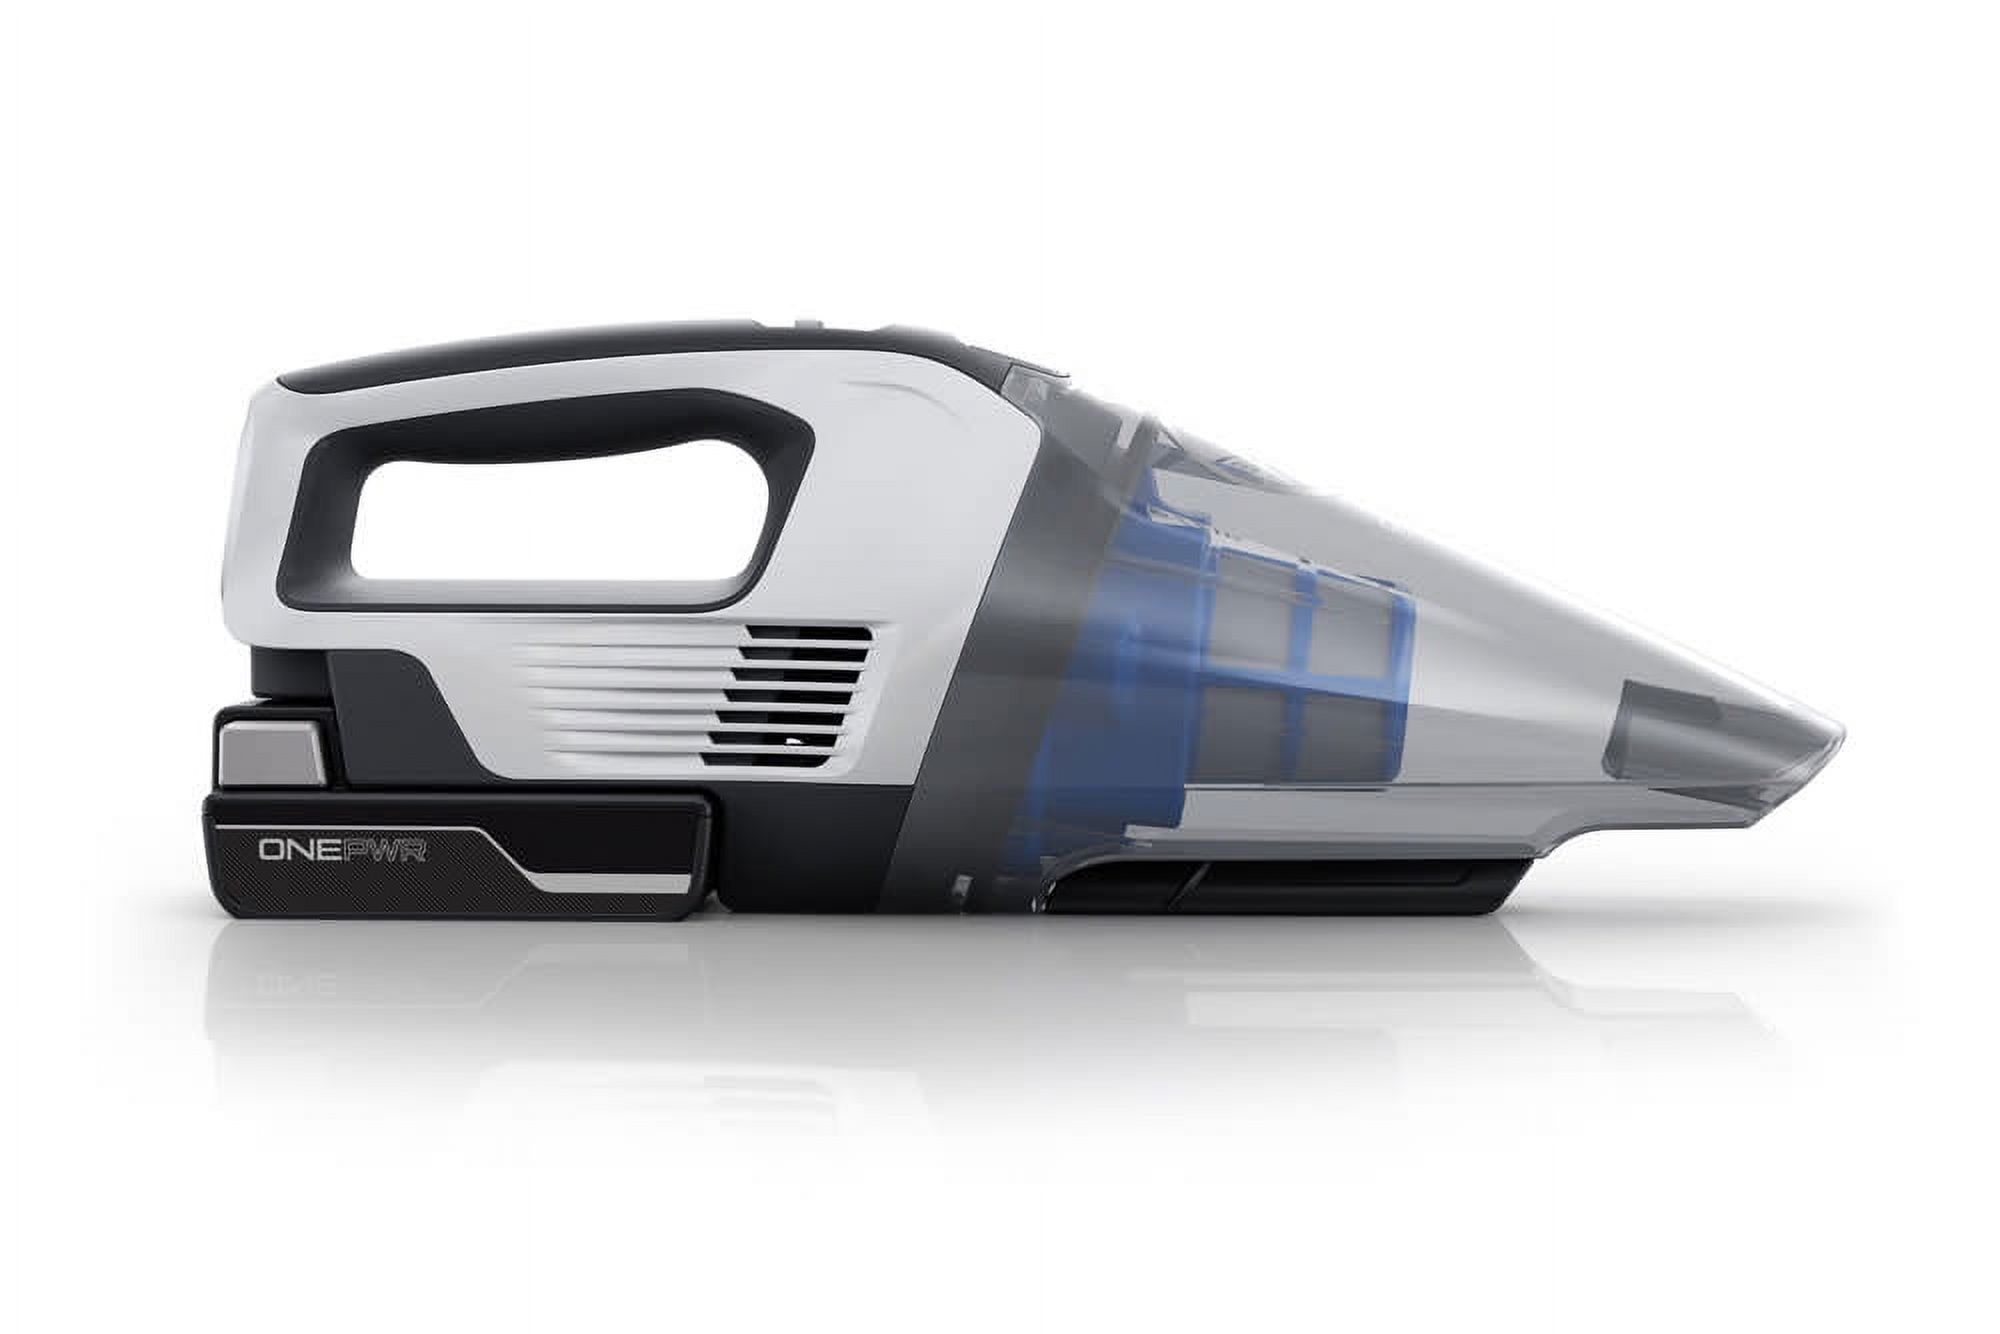 Hoover ONEPWR Cordless Handheld Vacuum Cleaner, BH57005 - image 1 of 6